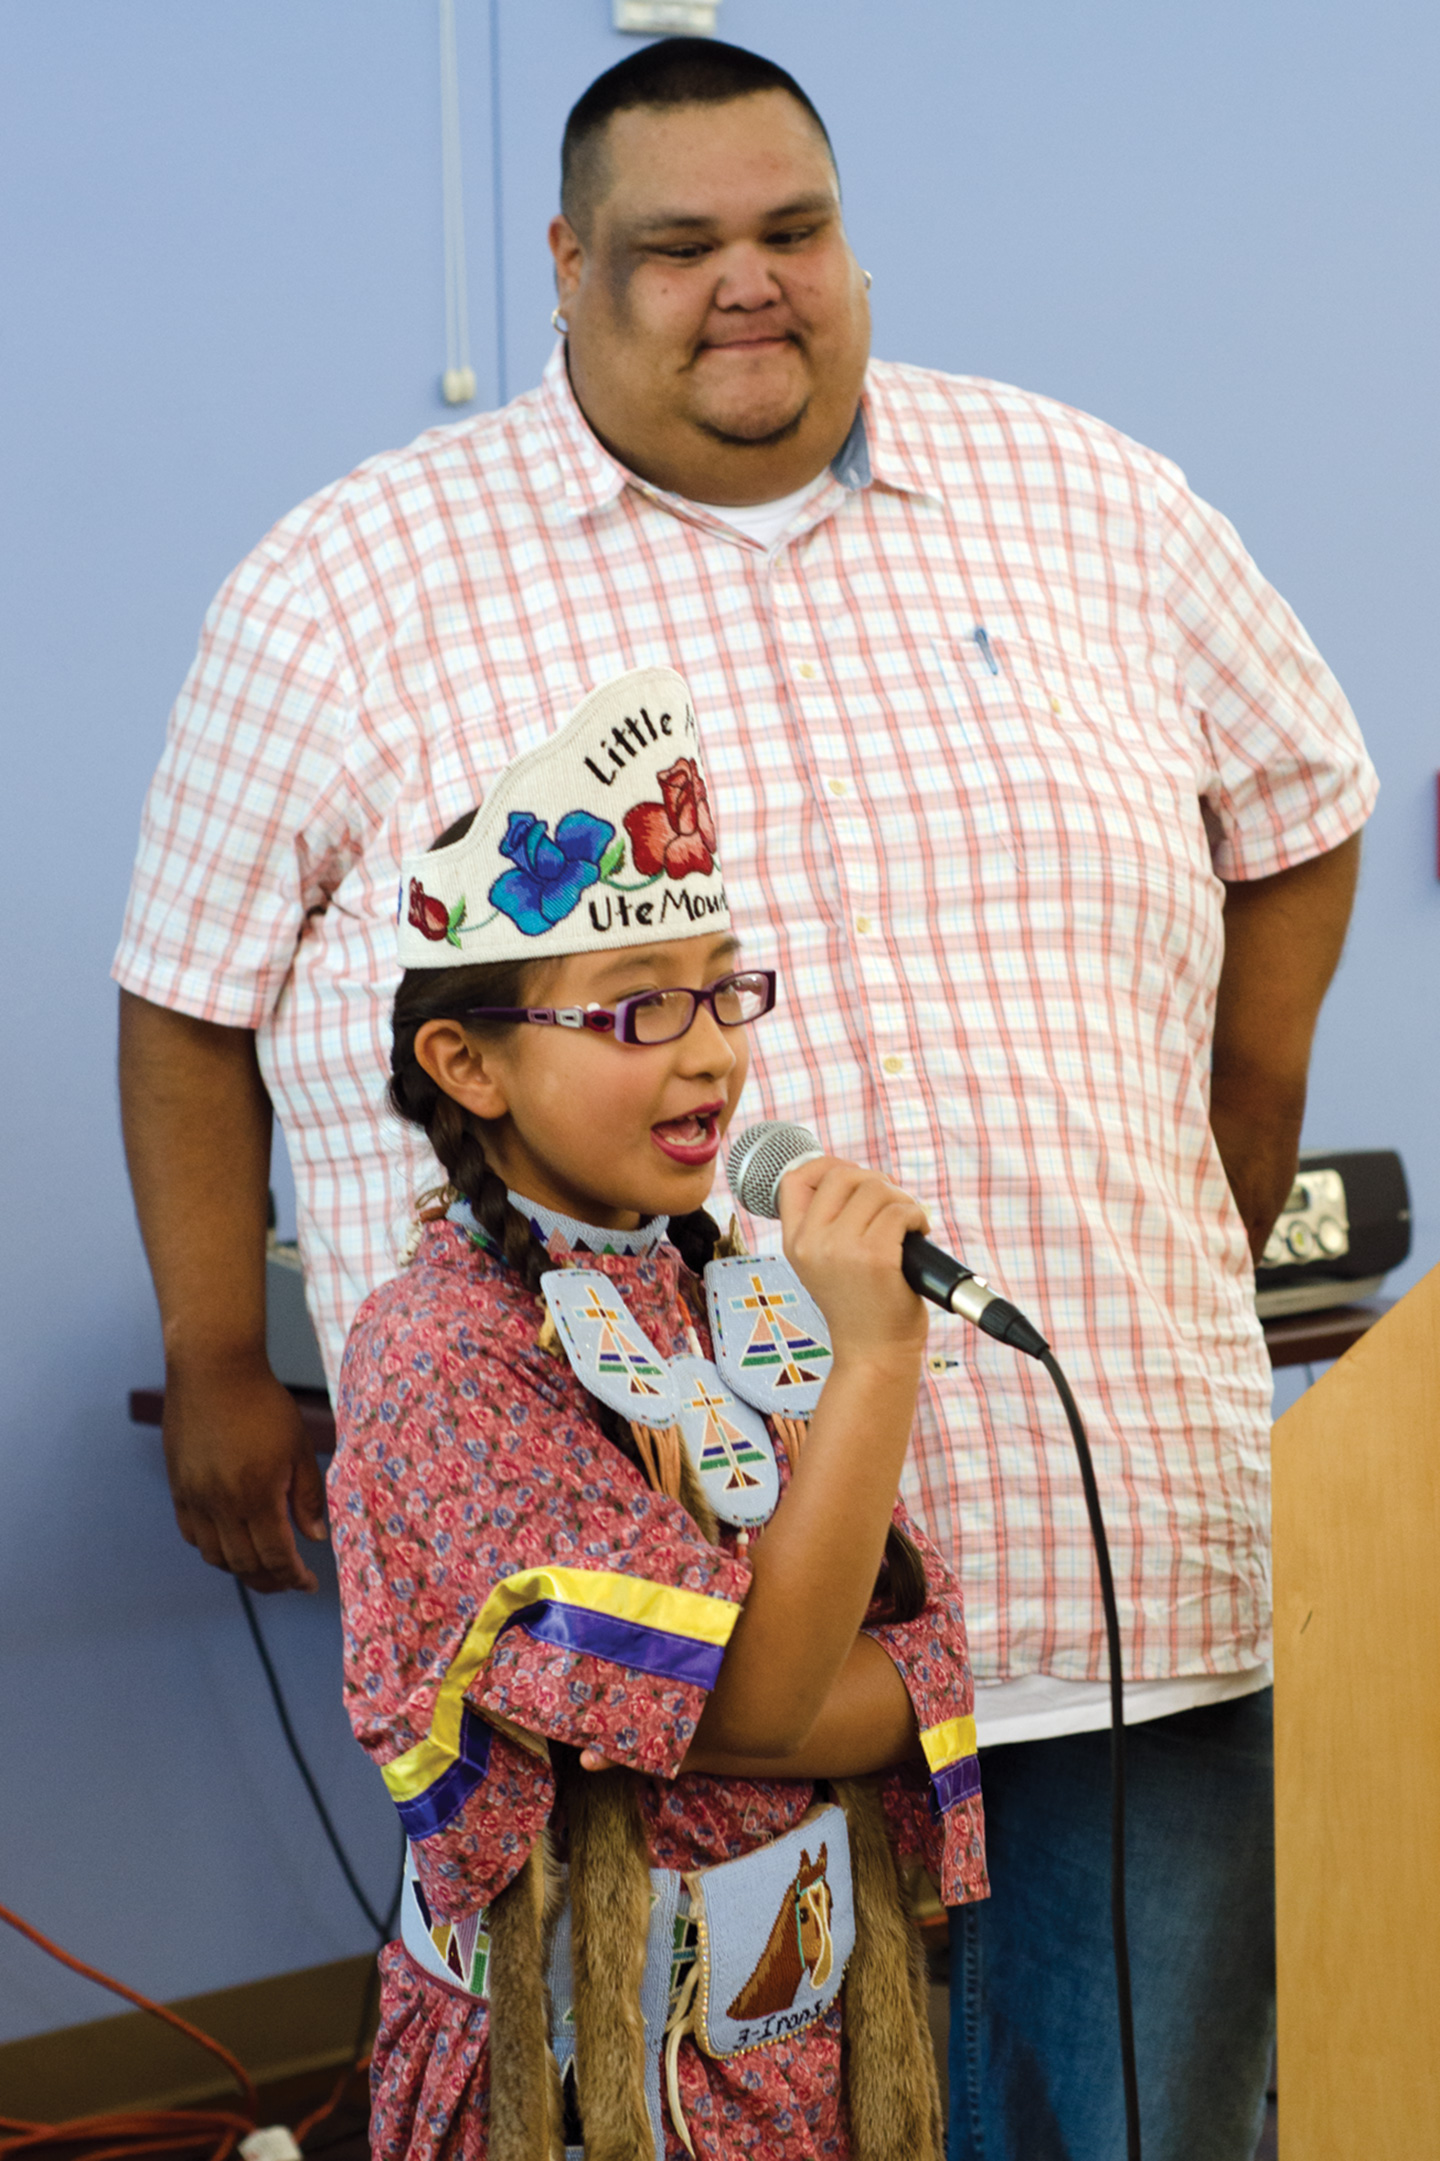 Southern Ute Chairman Jimmy R. Newton Jr. listens on as Little Miss Ute Mountain speaks during the Tri-Ute Games Closing Ceremony at the Multi-purpose Facility on Thursday, July 25.